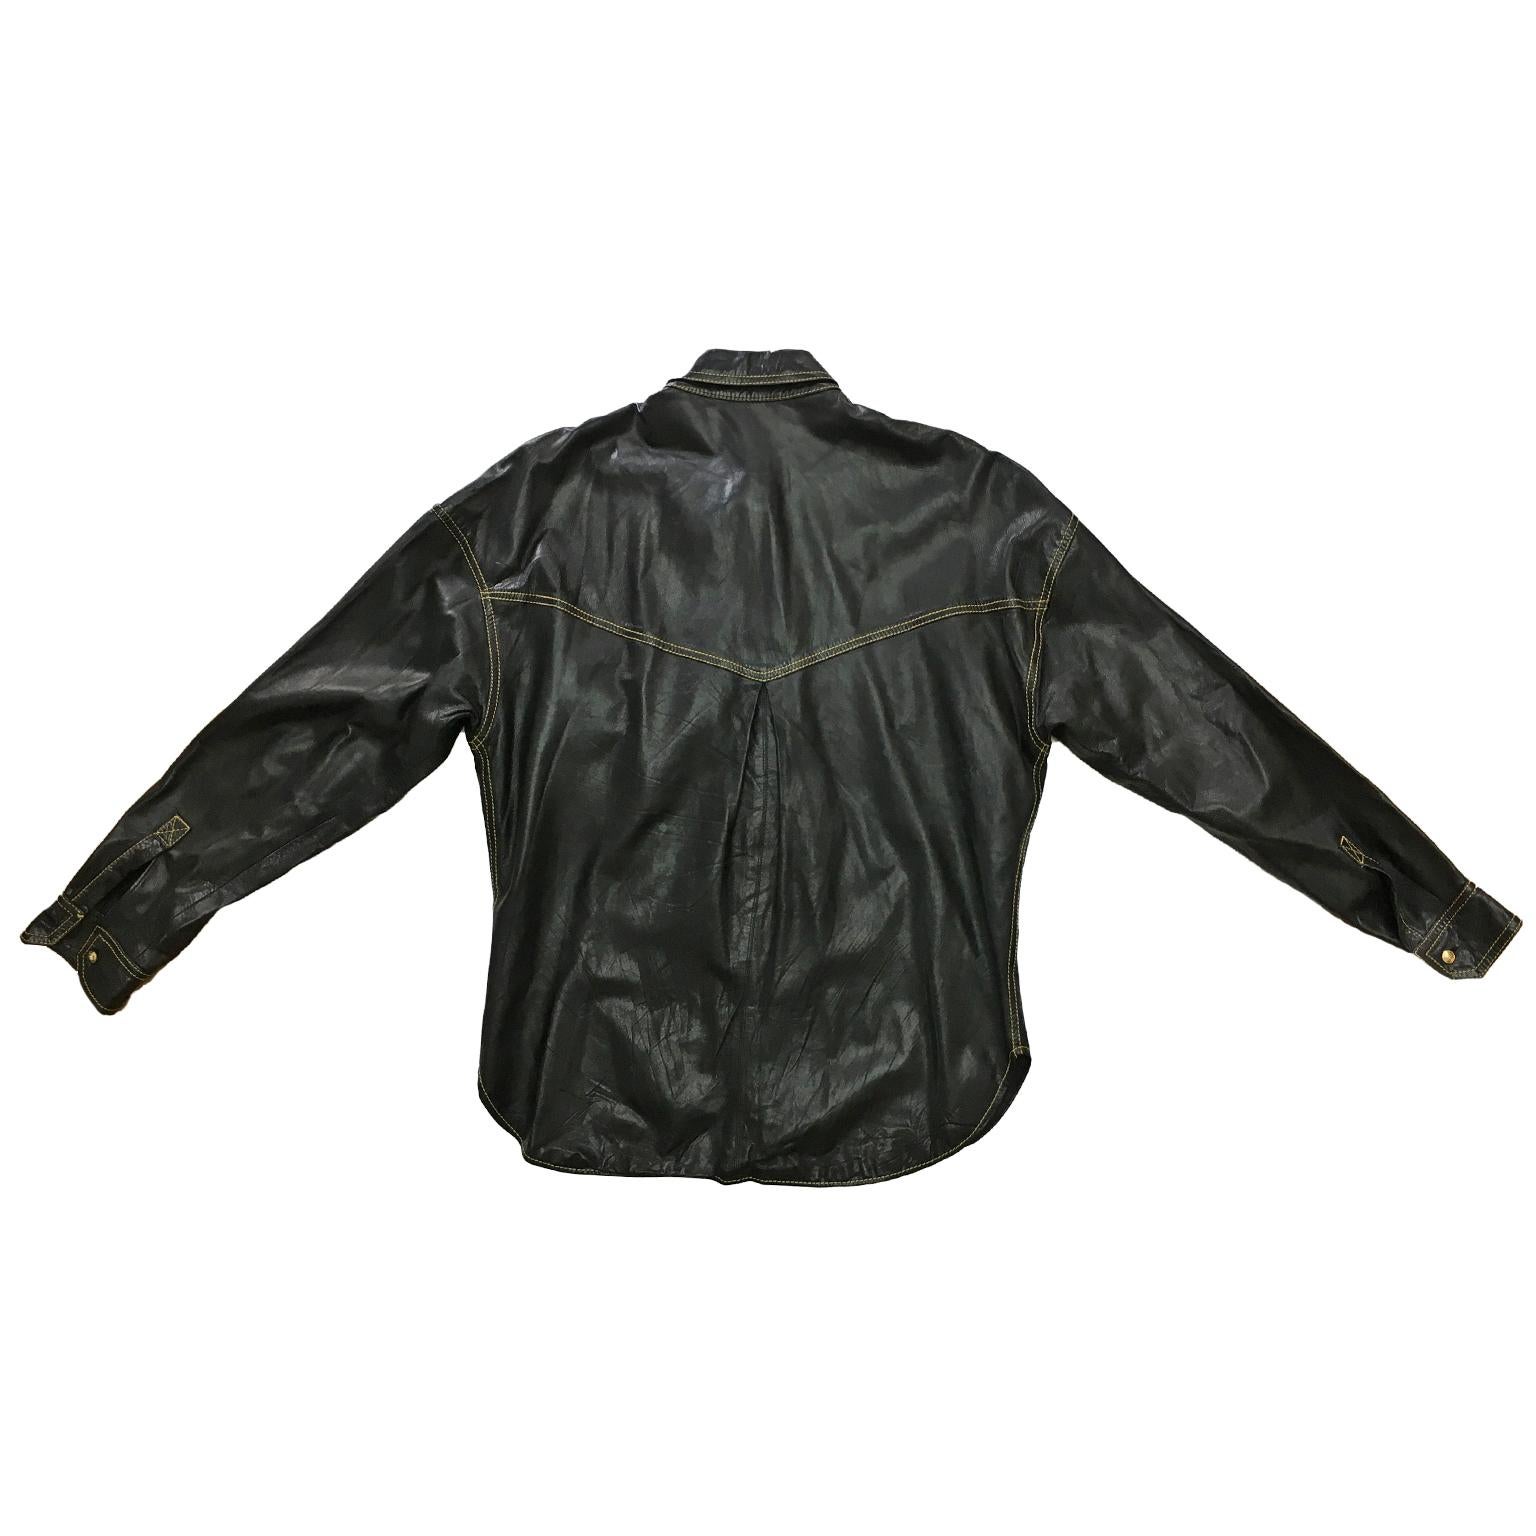 Gianni Versace Black Leather Signature Shirt SS 1993 In Good Condition For Sale In Berlin, DE